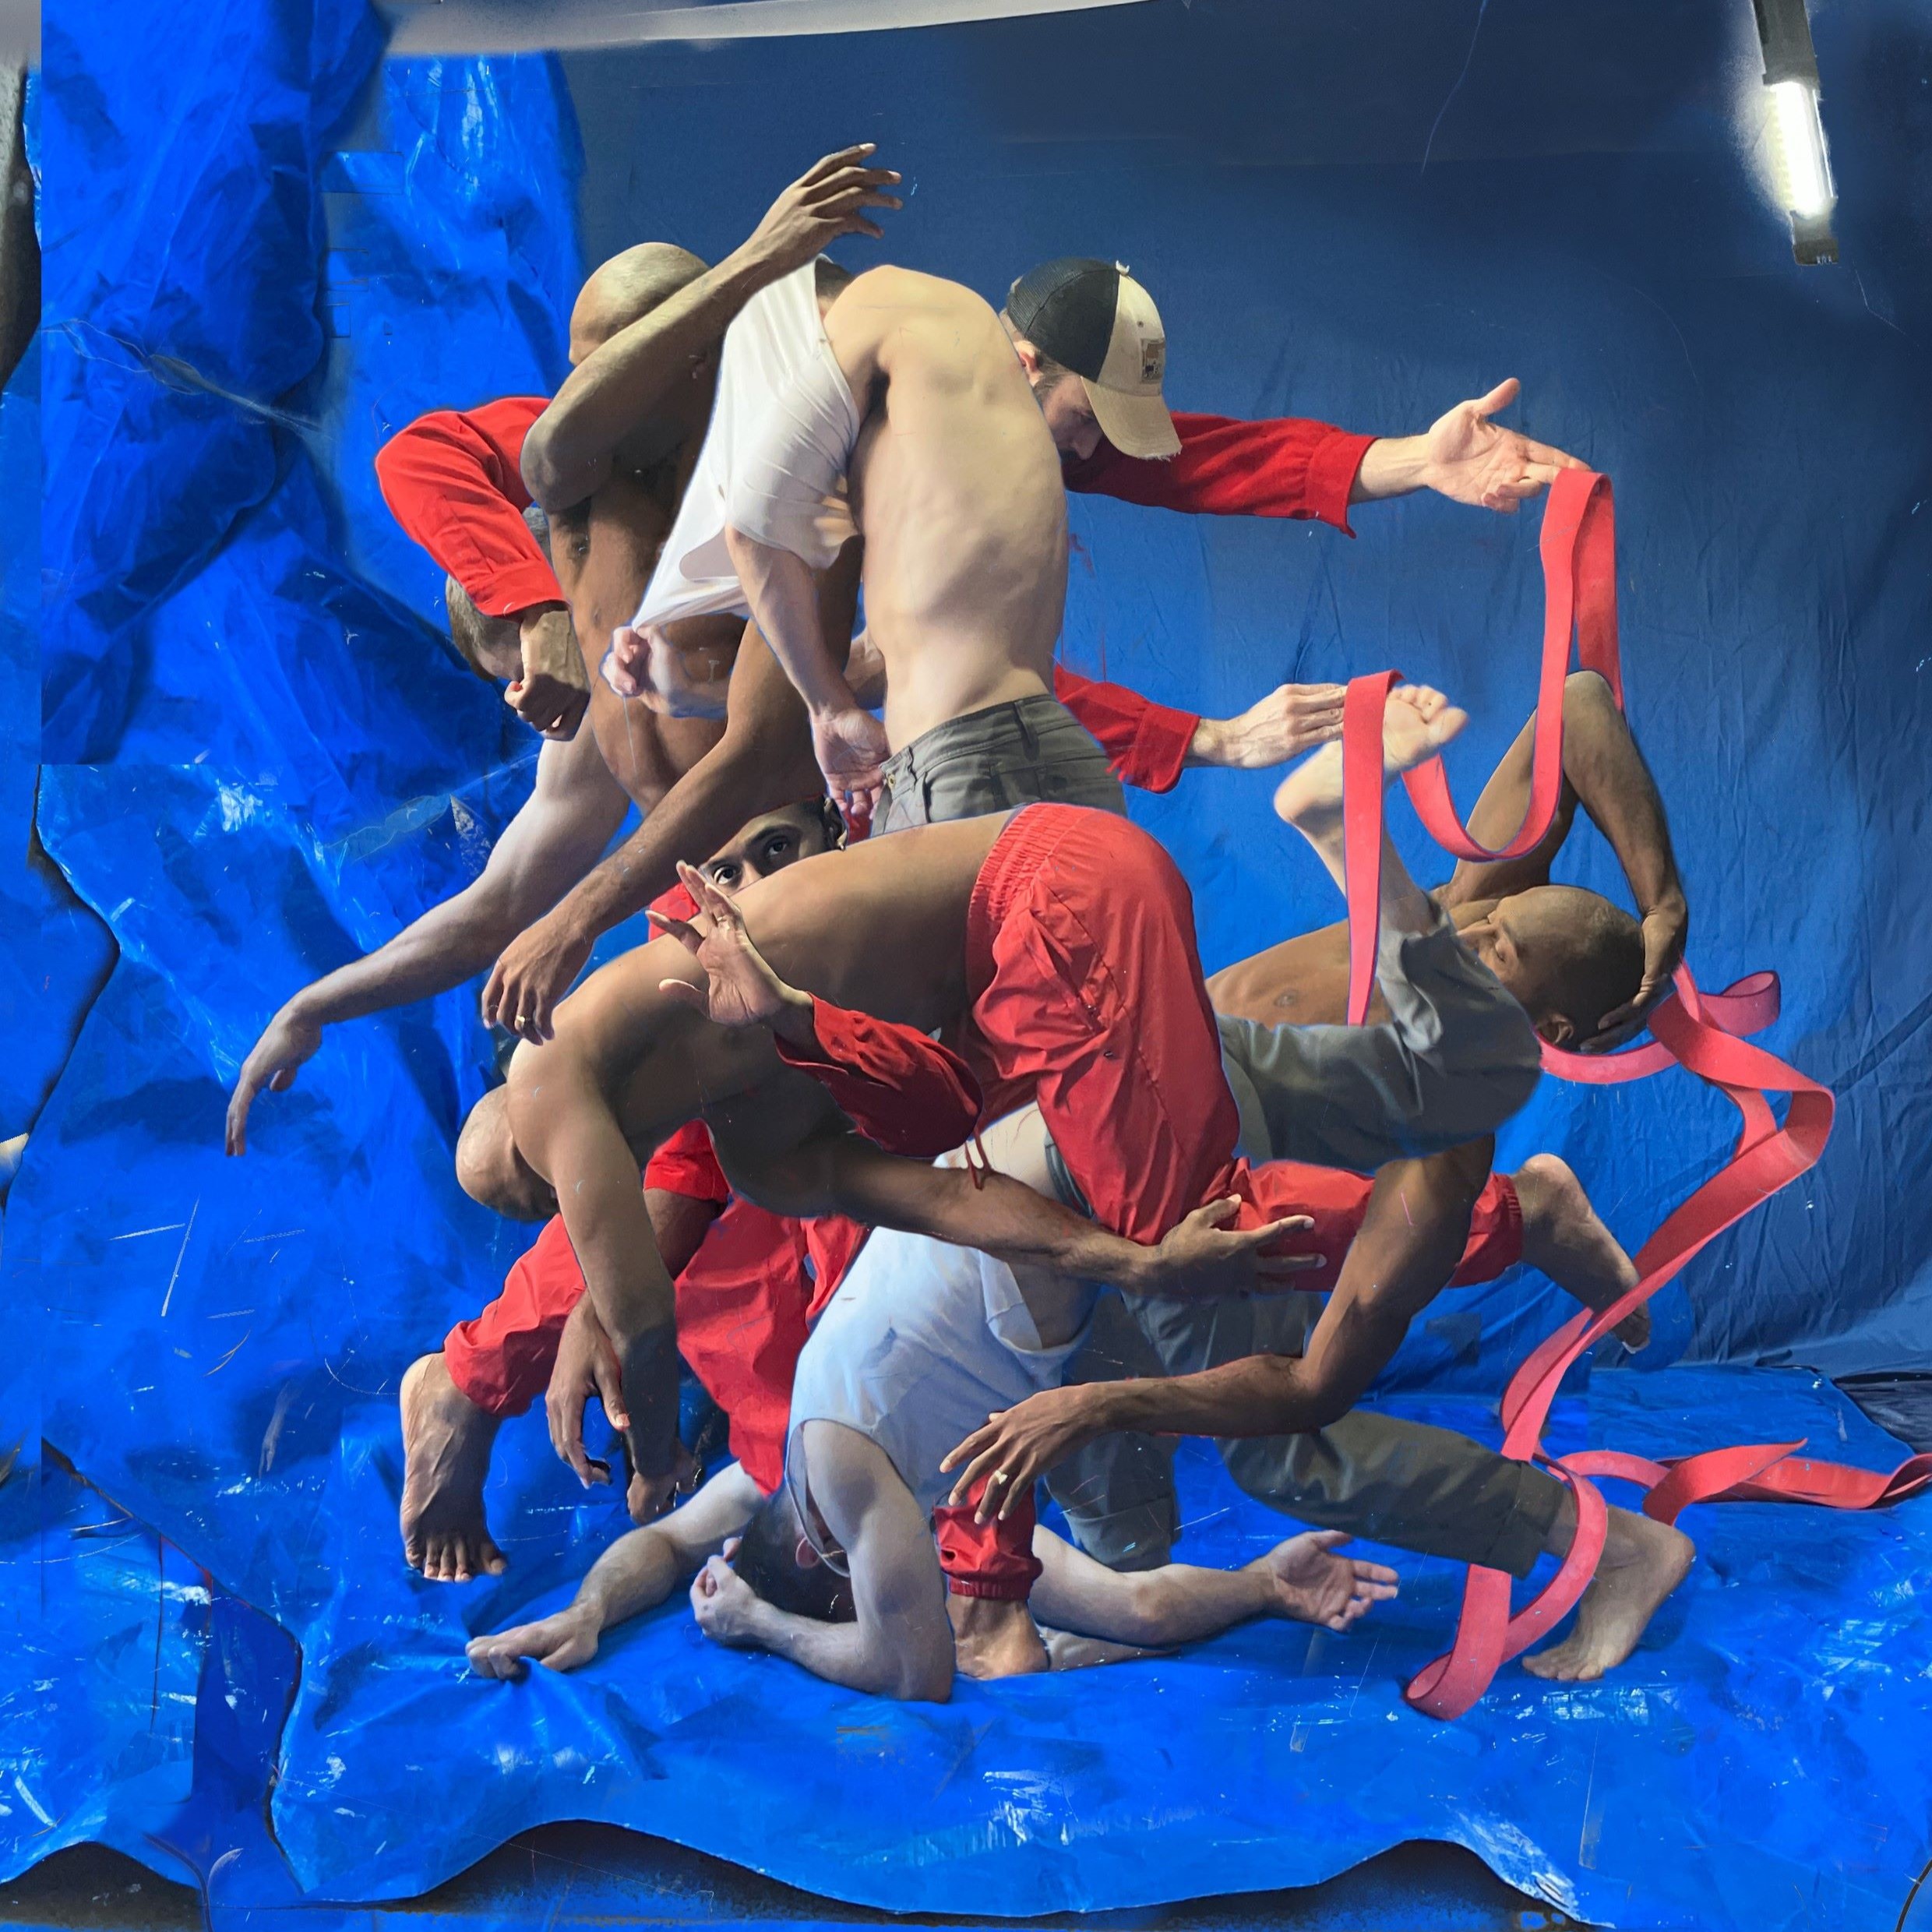 Photo collage of two dancers' bodies intertwined multiple times in a bright studio space.